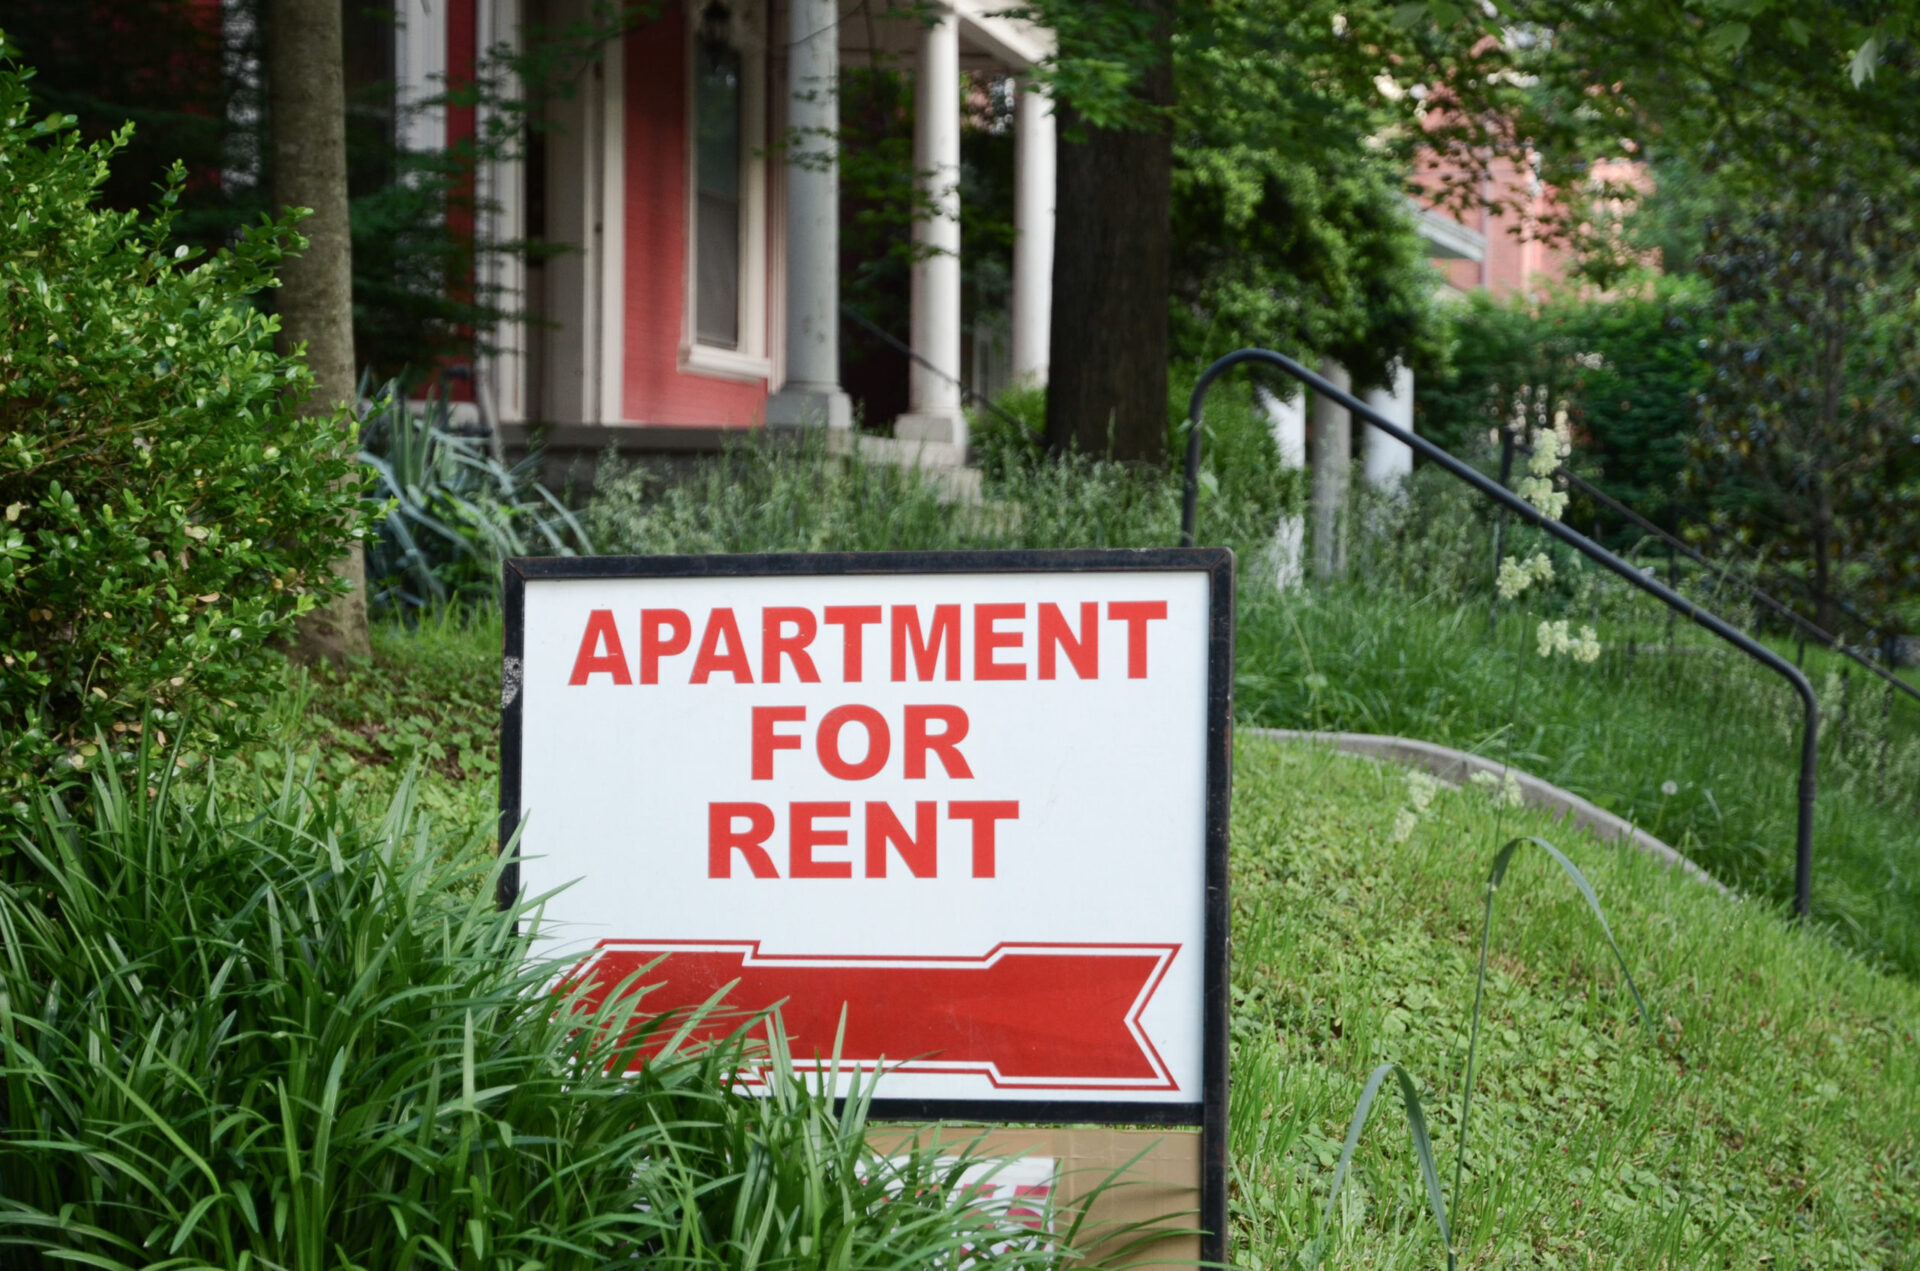 Rent Prices Hit Record in August